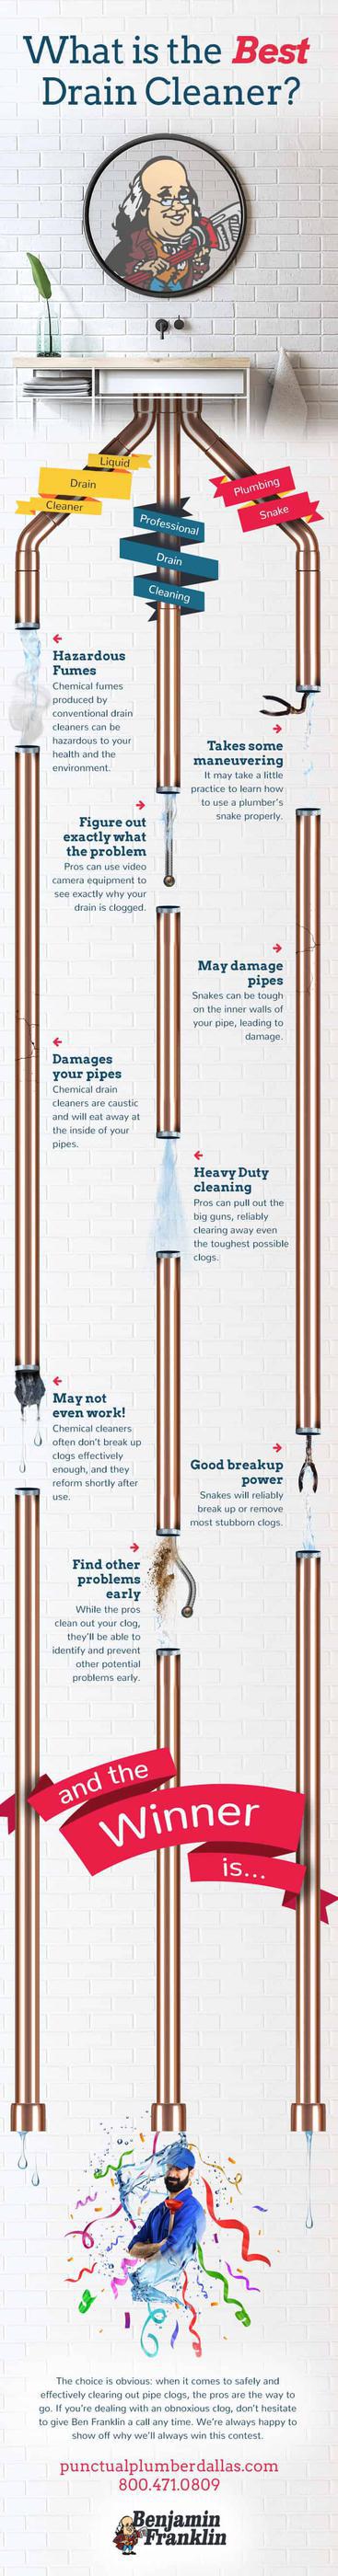 What Is the Best Drain Cleaner? [Infographic]